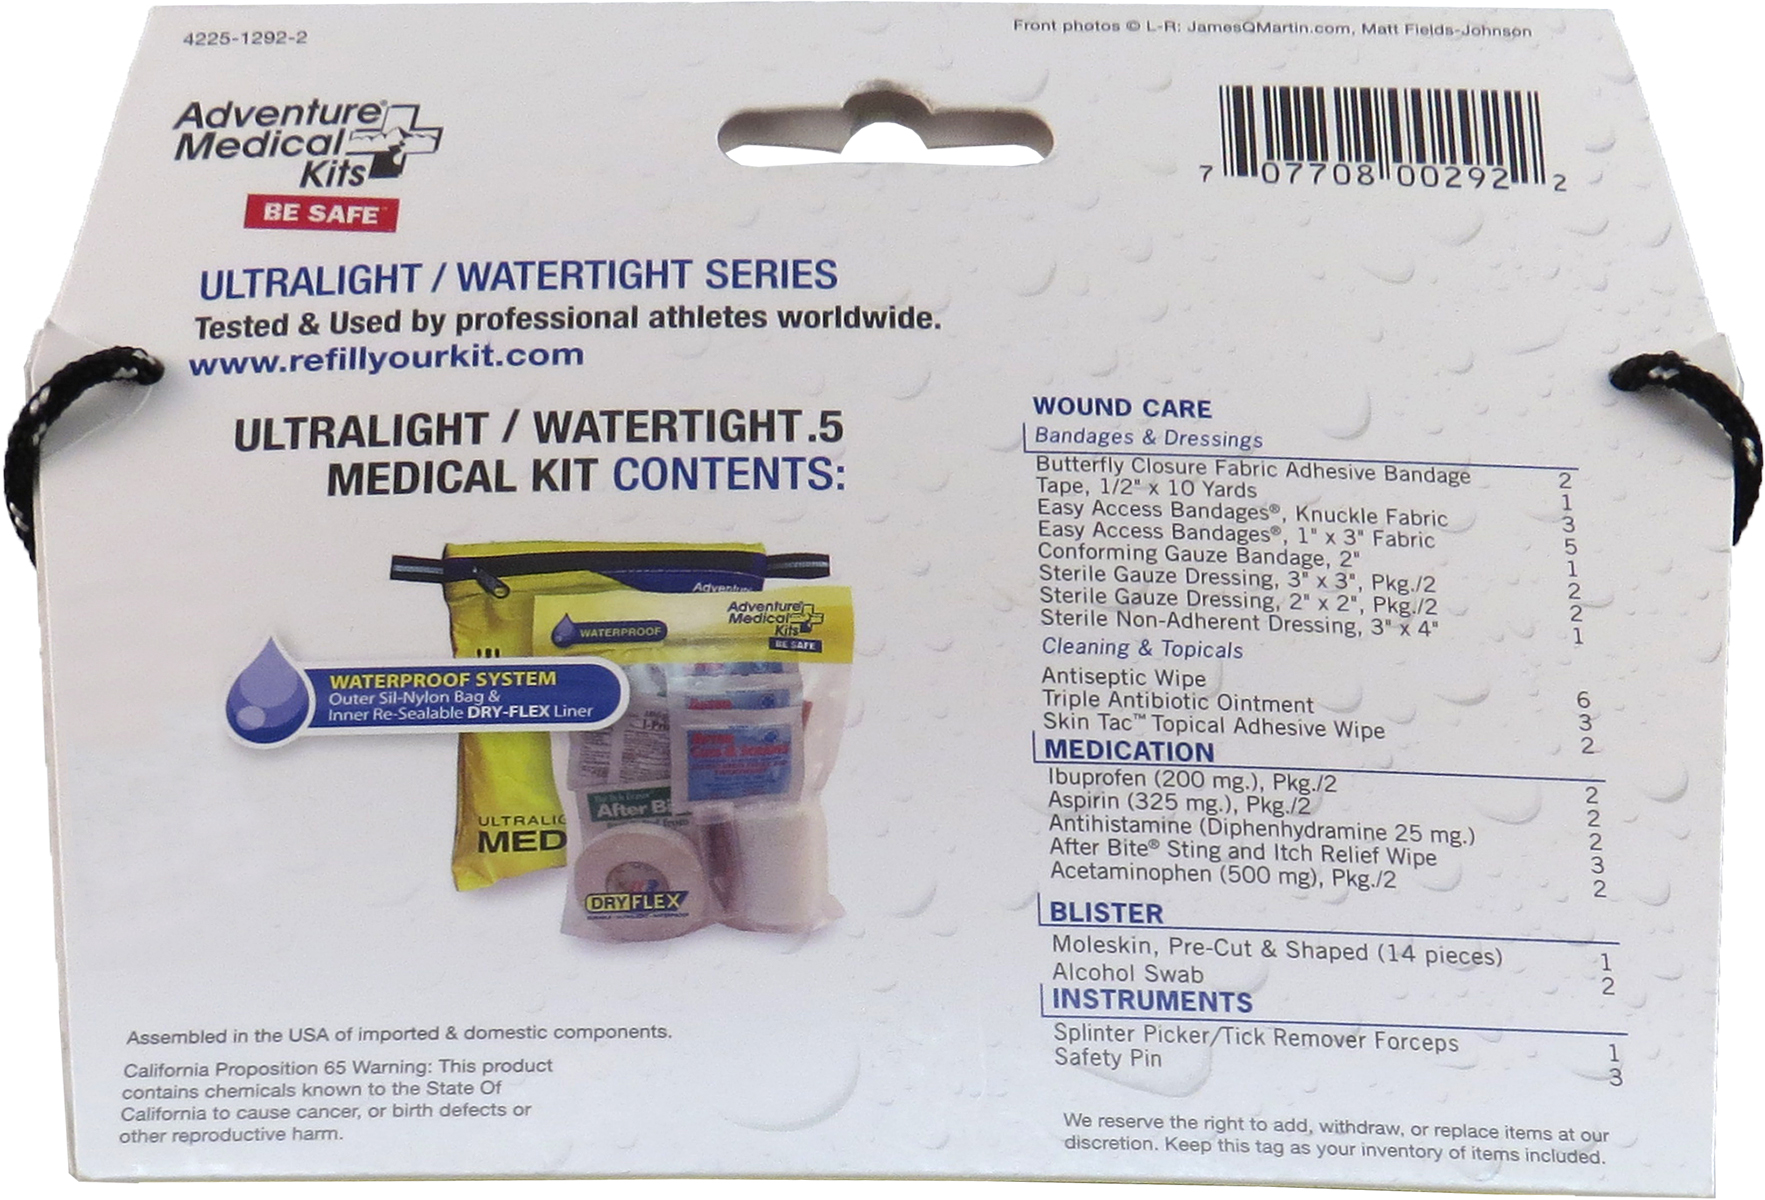 Adventure Medical Ultralight/Watertight .5 First Aid Kit - image 4 of 7